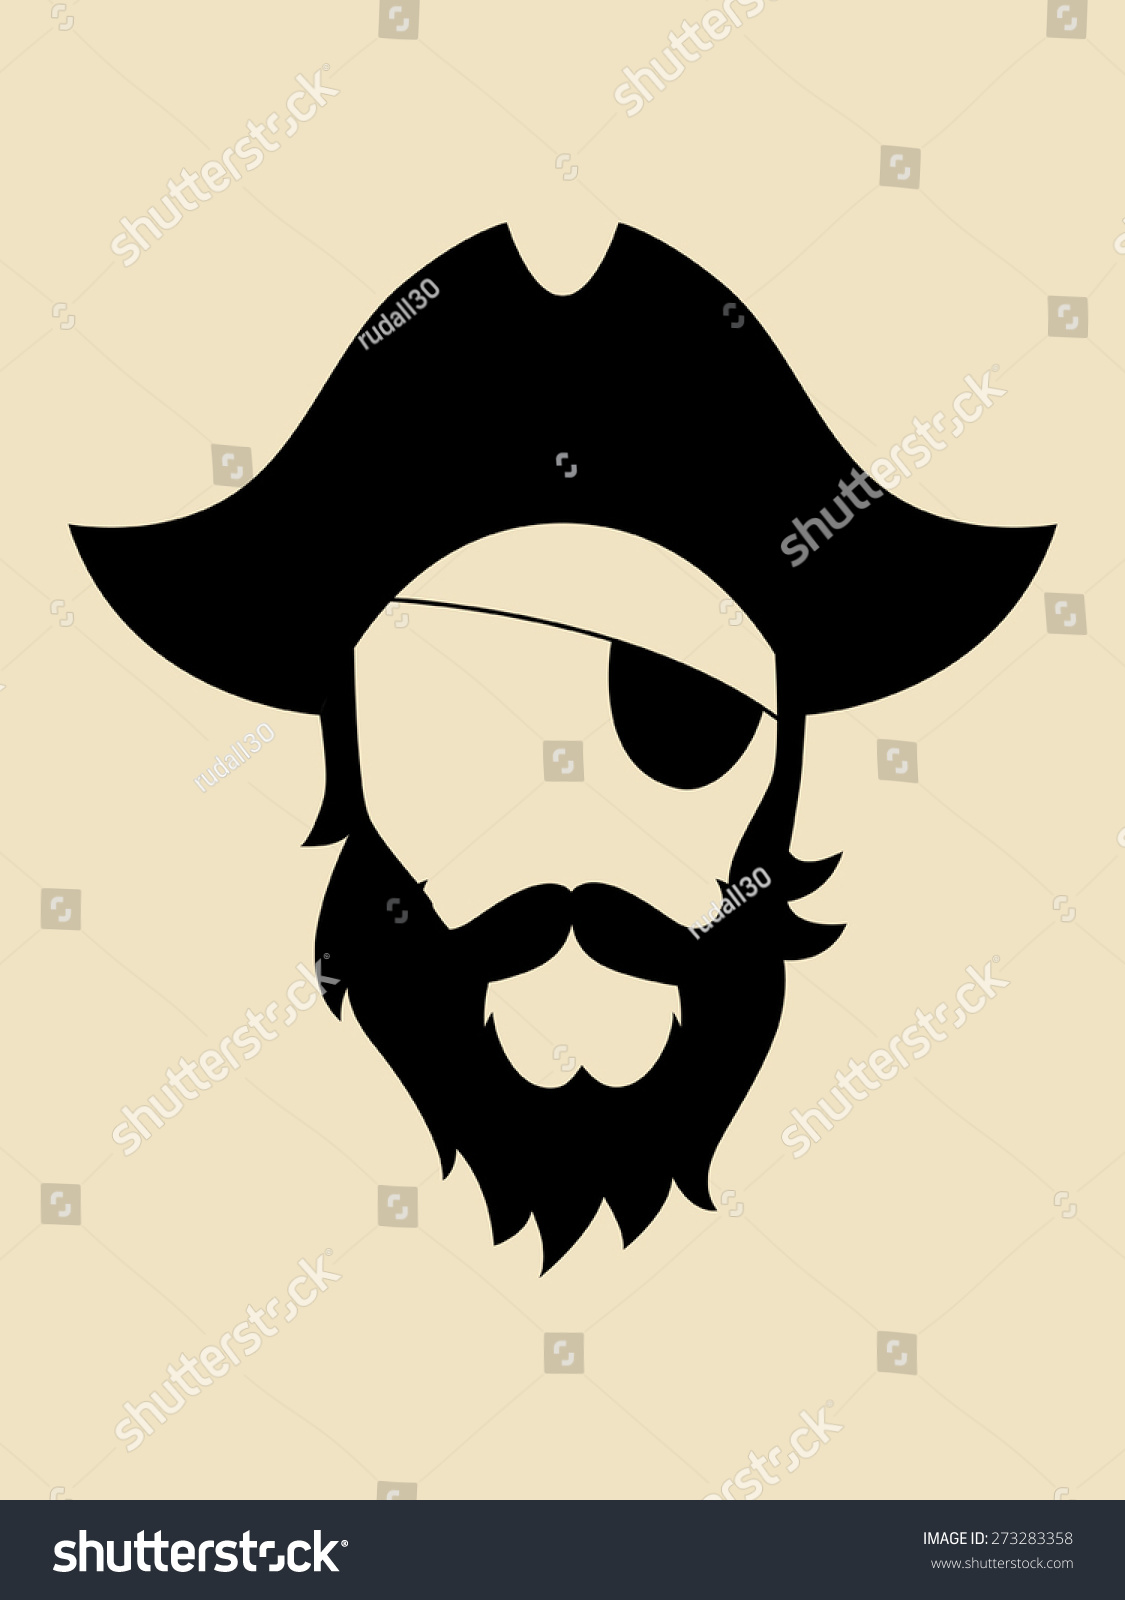 SVG of Man with beards and mustache wearing a pirate hat symbol svg